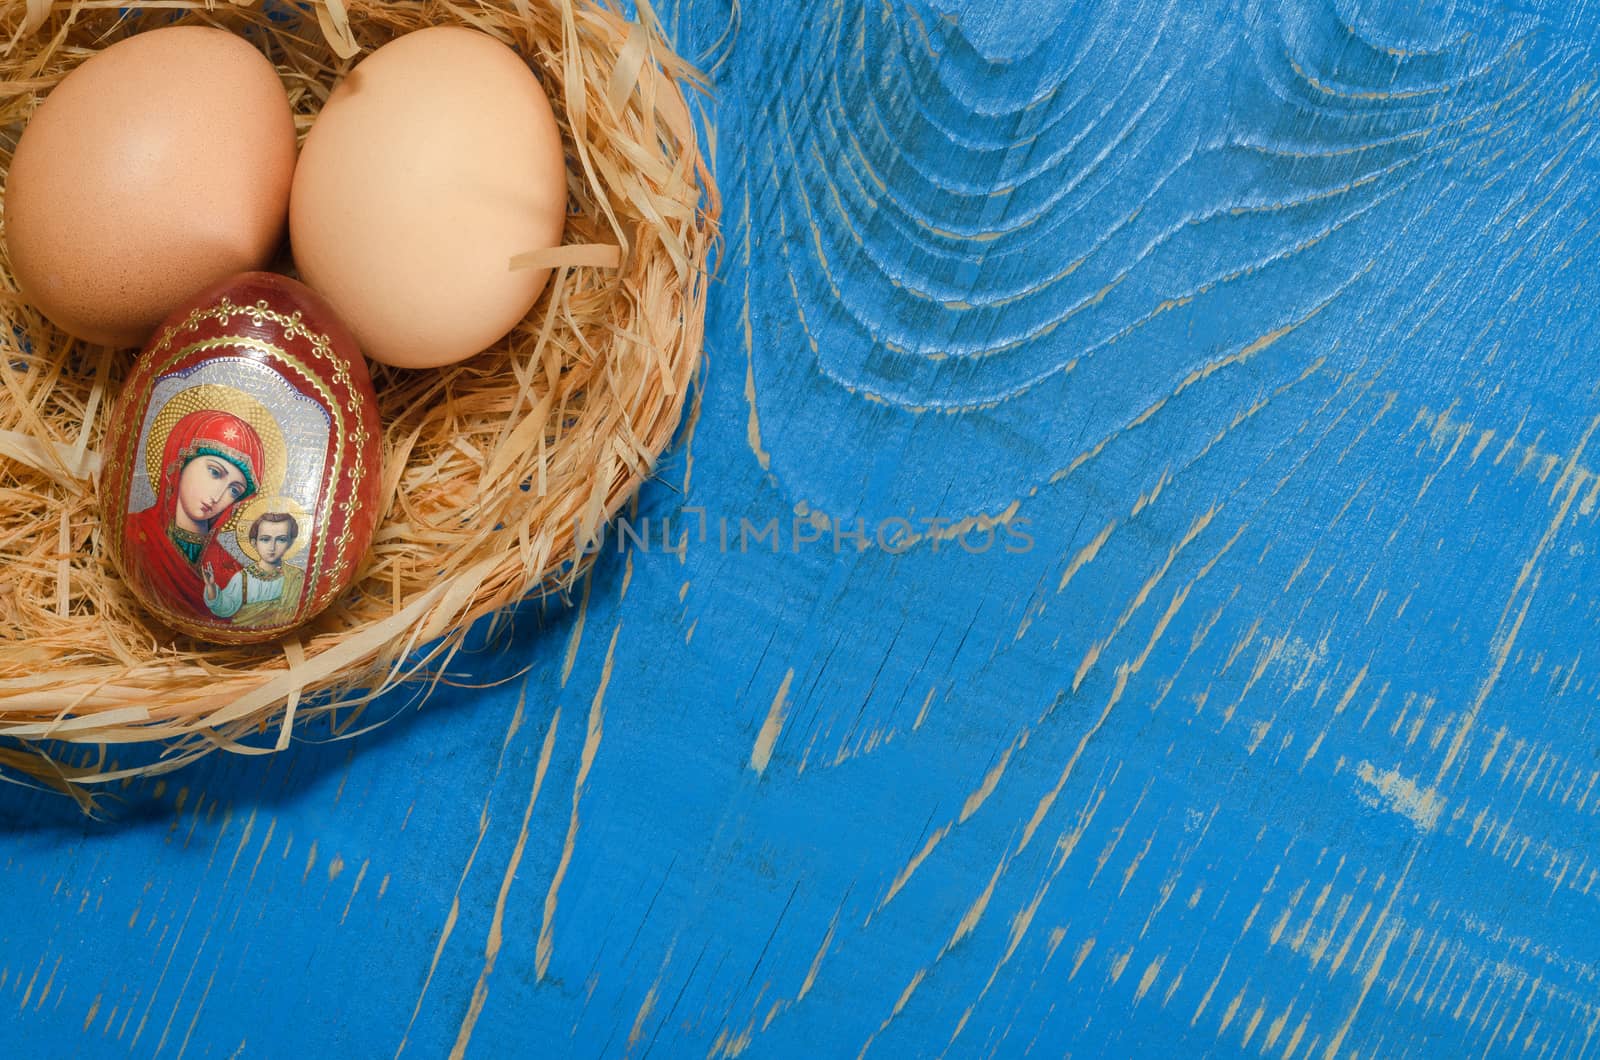 Eggs in the nest of bark, lying on a painted blue Board. On the Board, place for text.